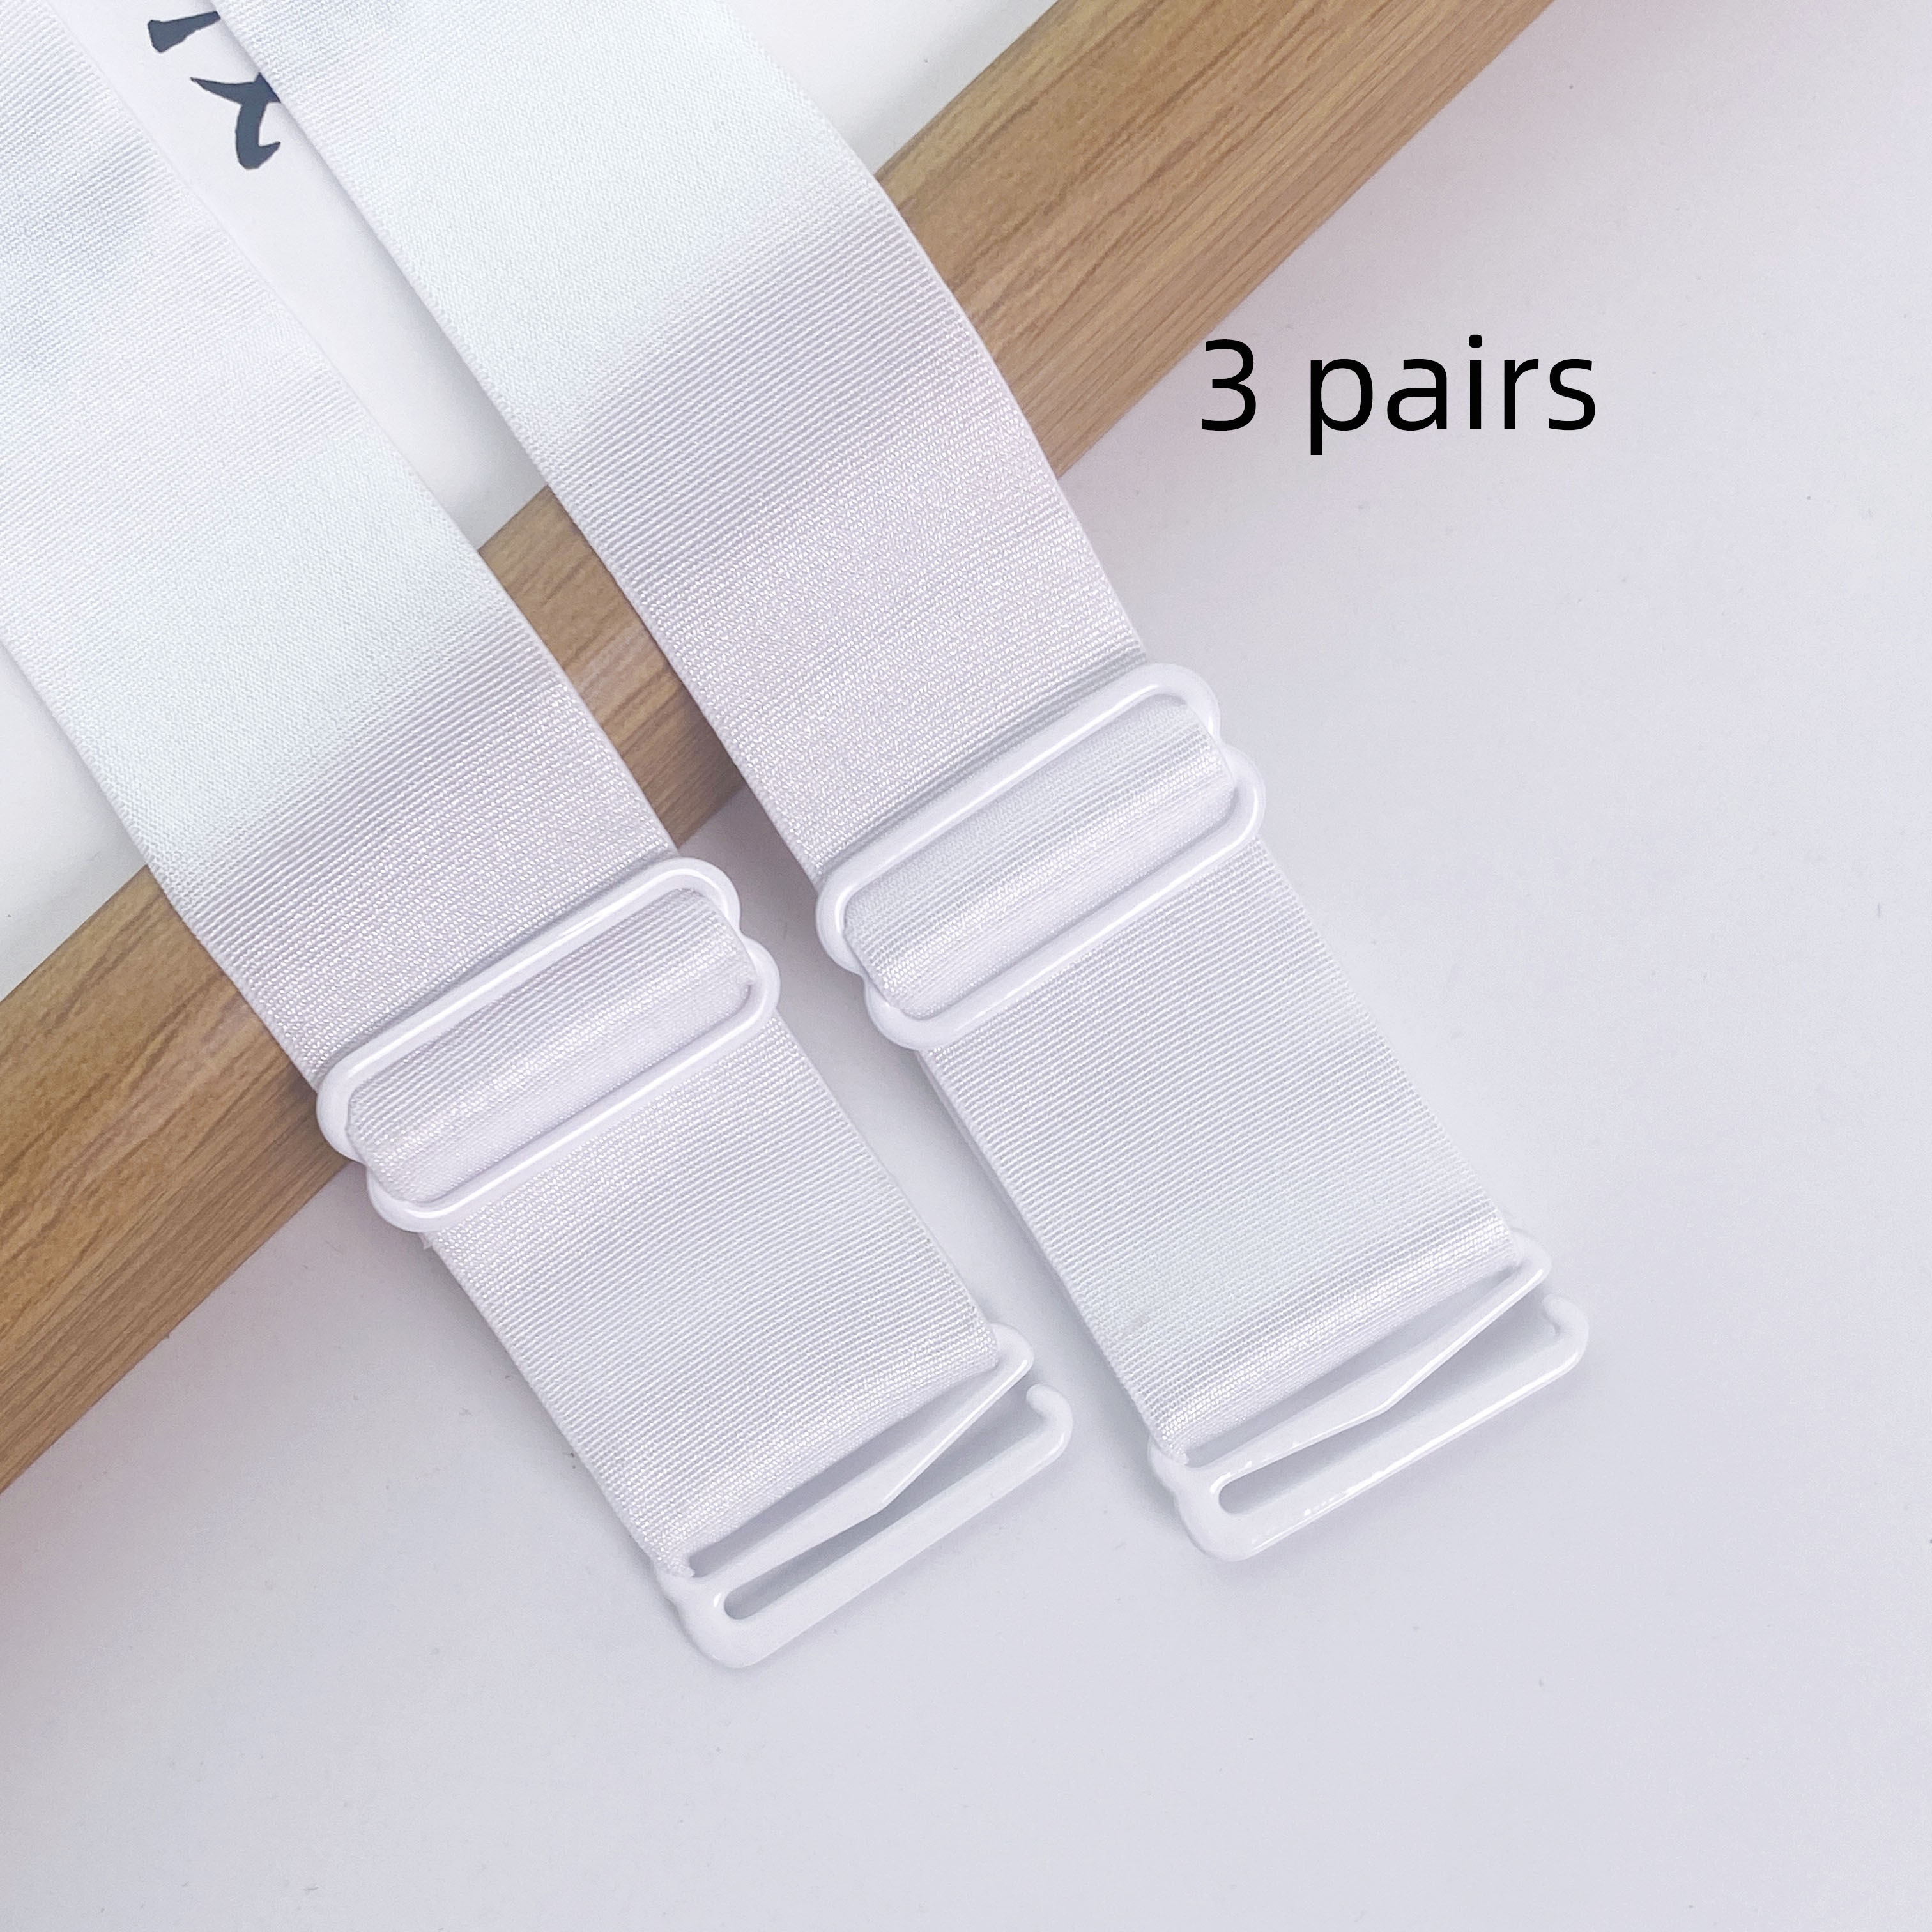 Generic Adjustable Shirt Straps Bra Strap With Non-Slip Clamps 3